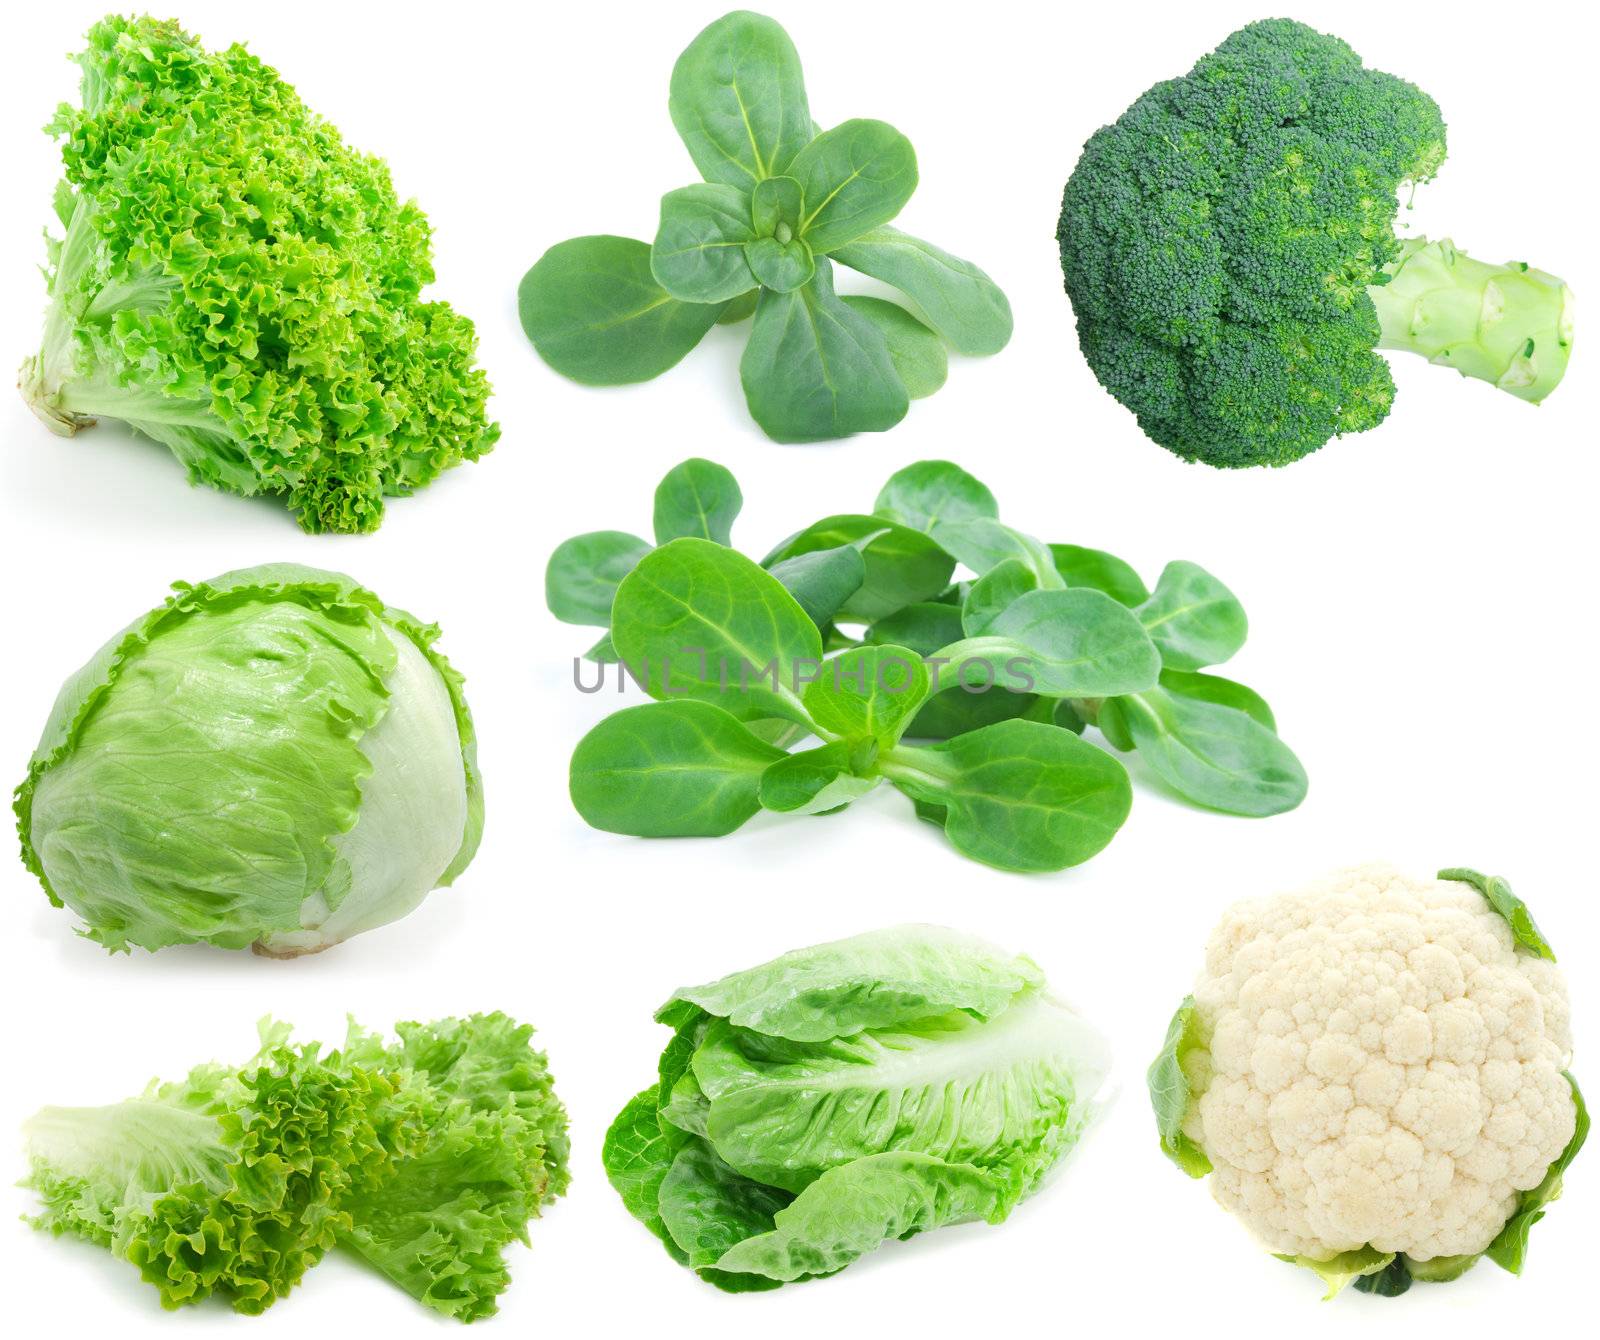 cabbage and green vegetable collection isolated on white background 
